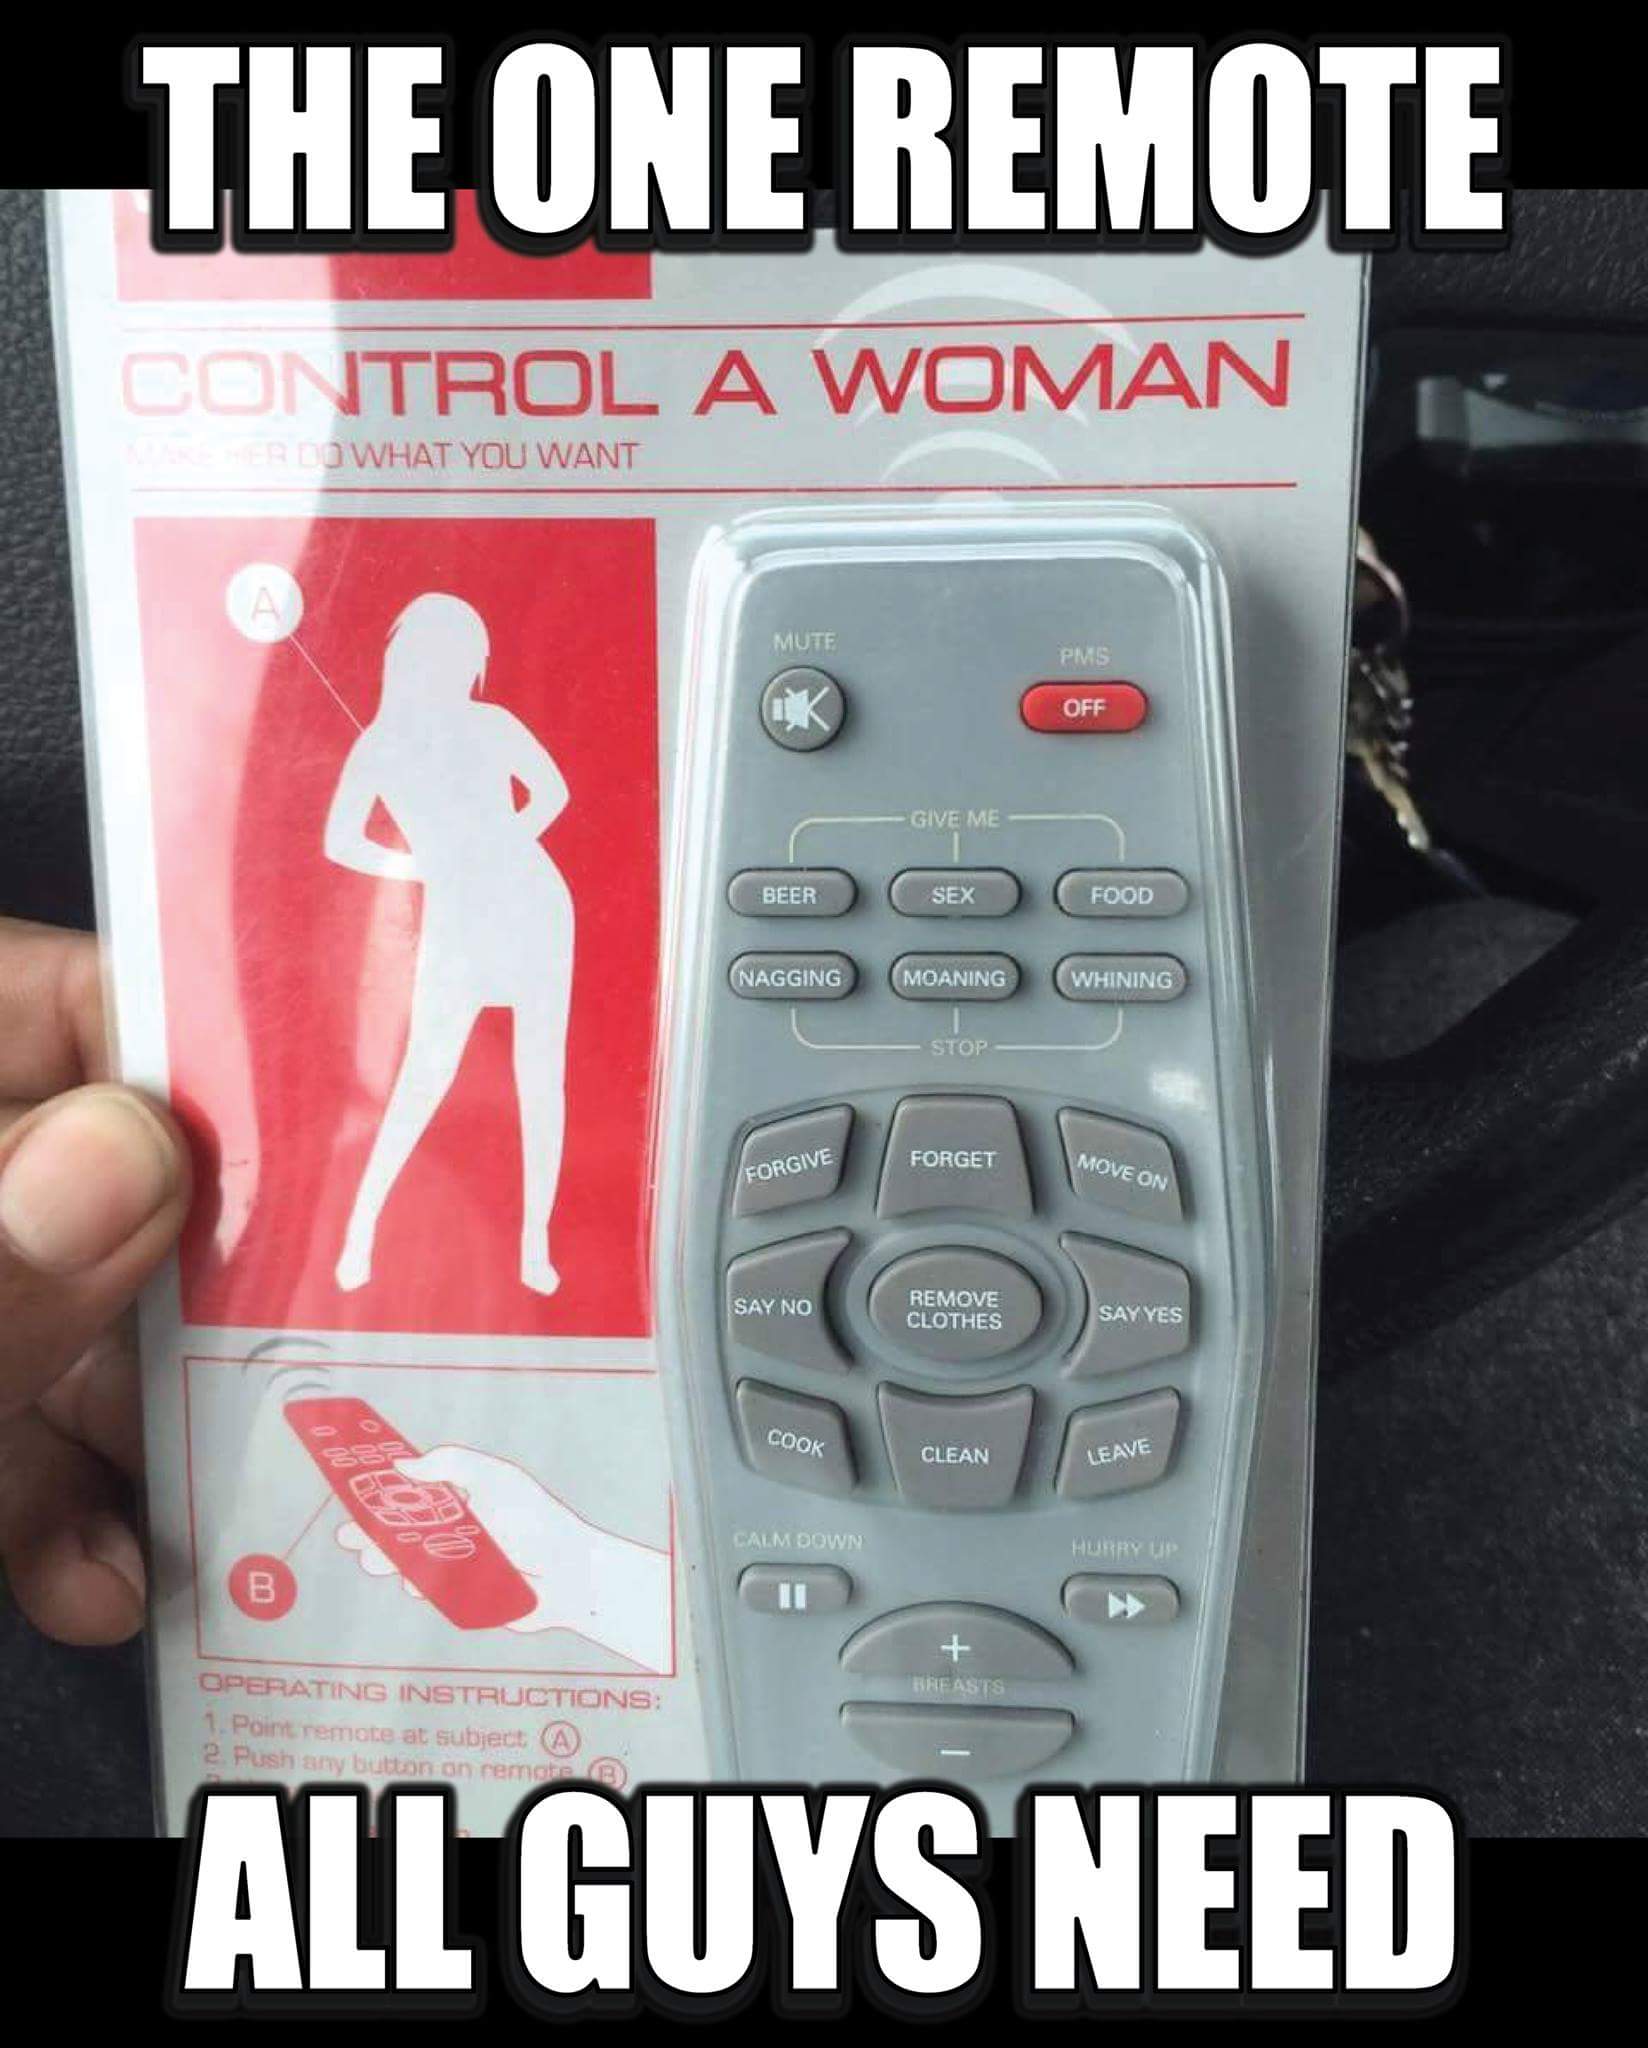 Meme of a remote for women.